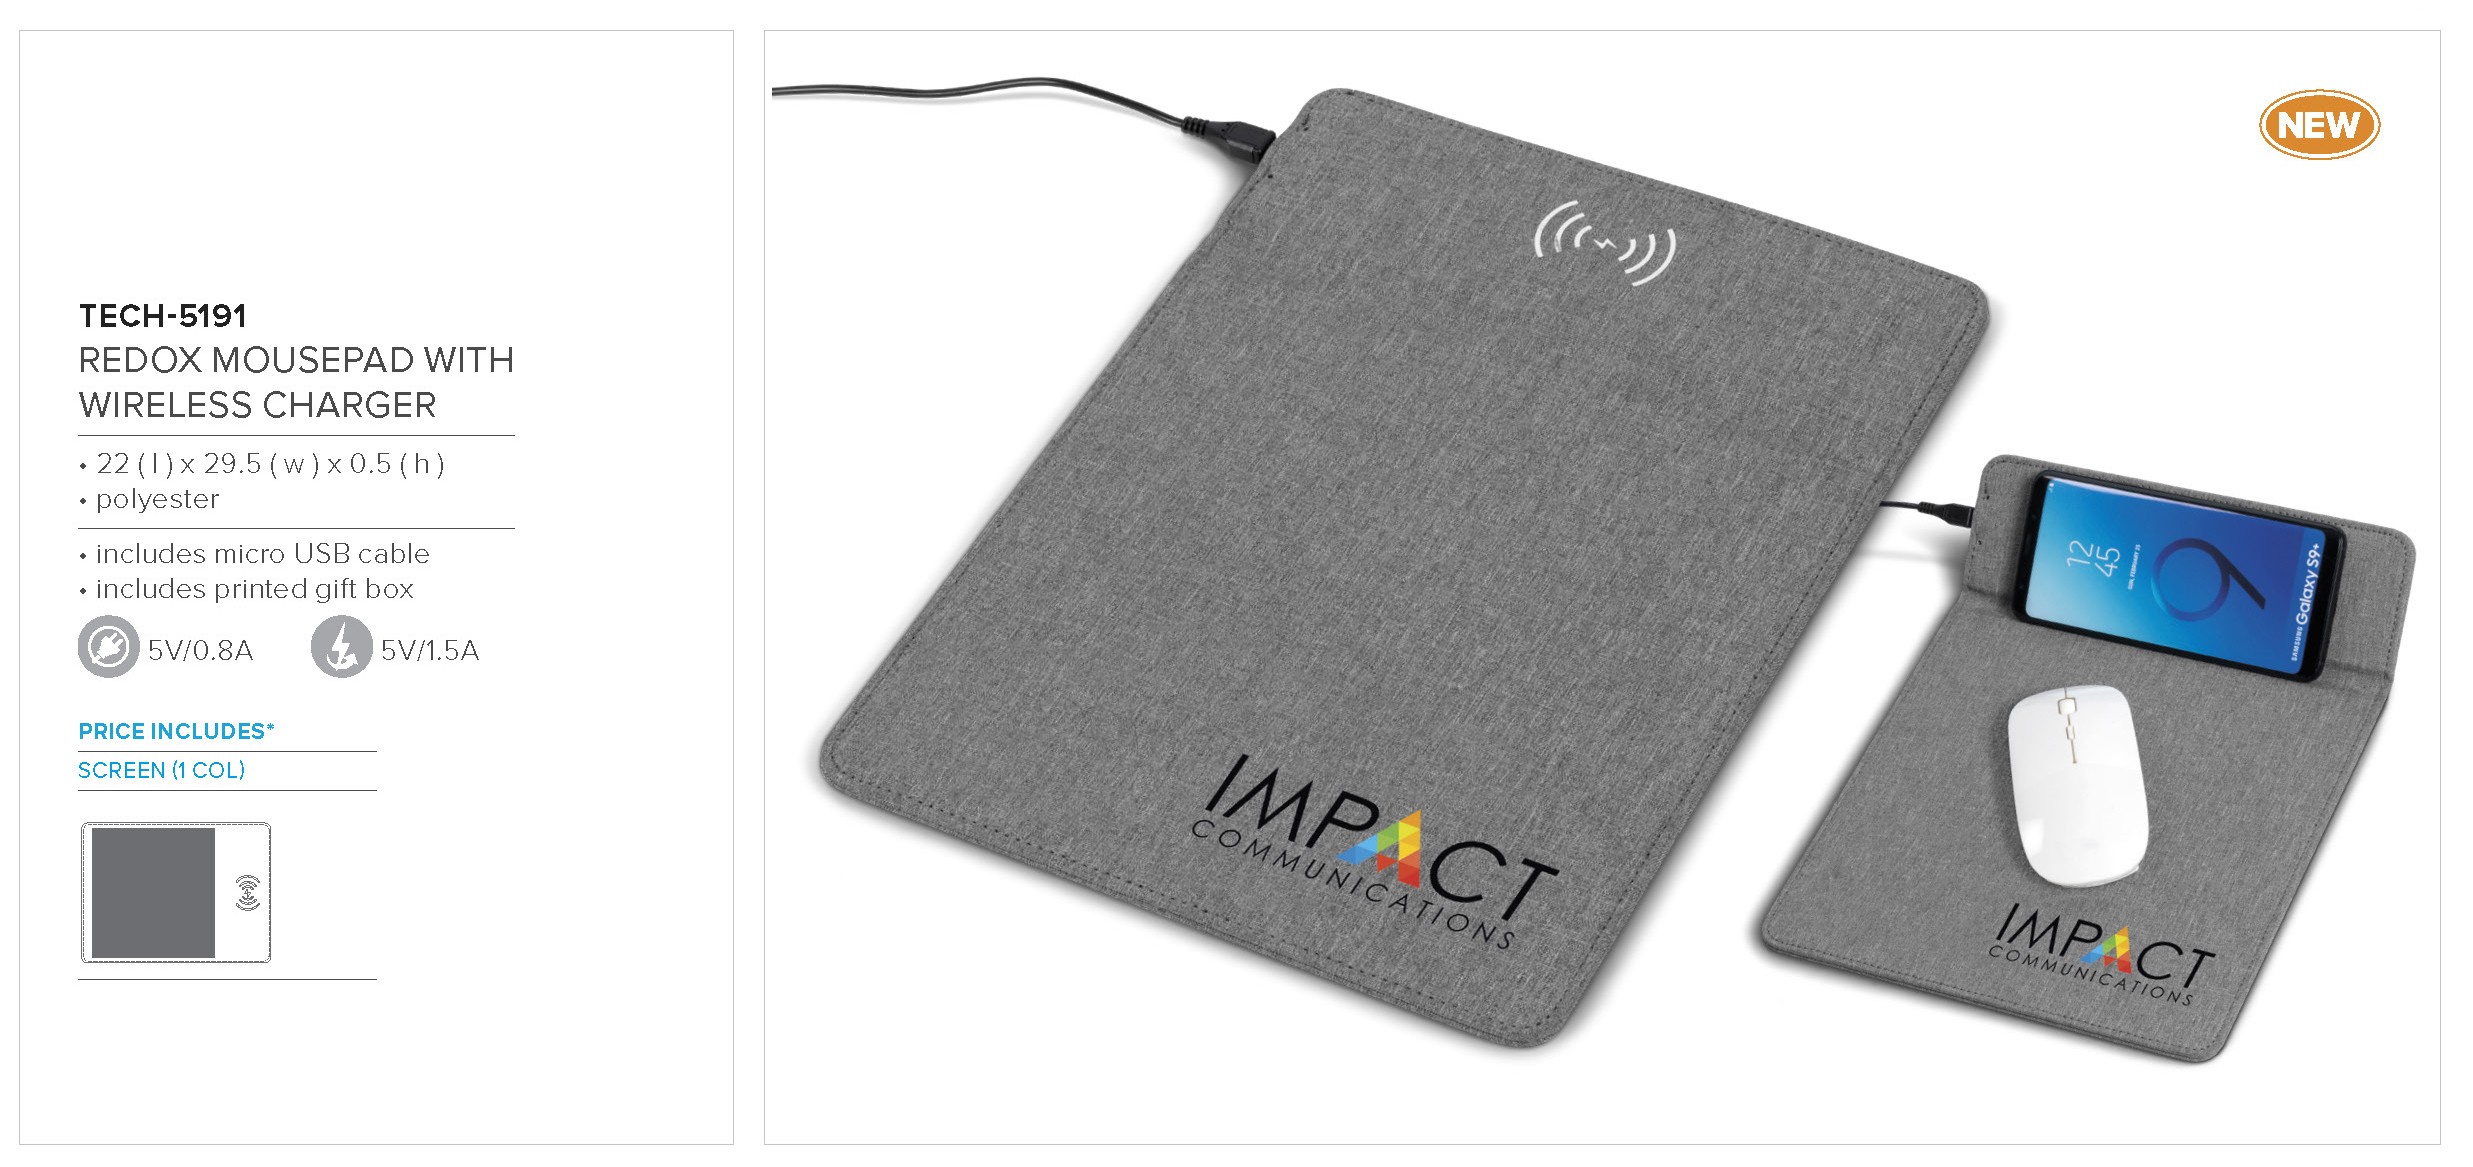 TECH-5191 - Redox Mouse Pad With Wireless Charger - Catalogue Image